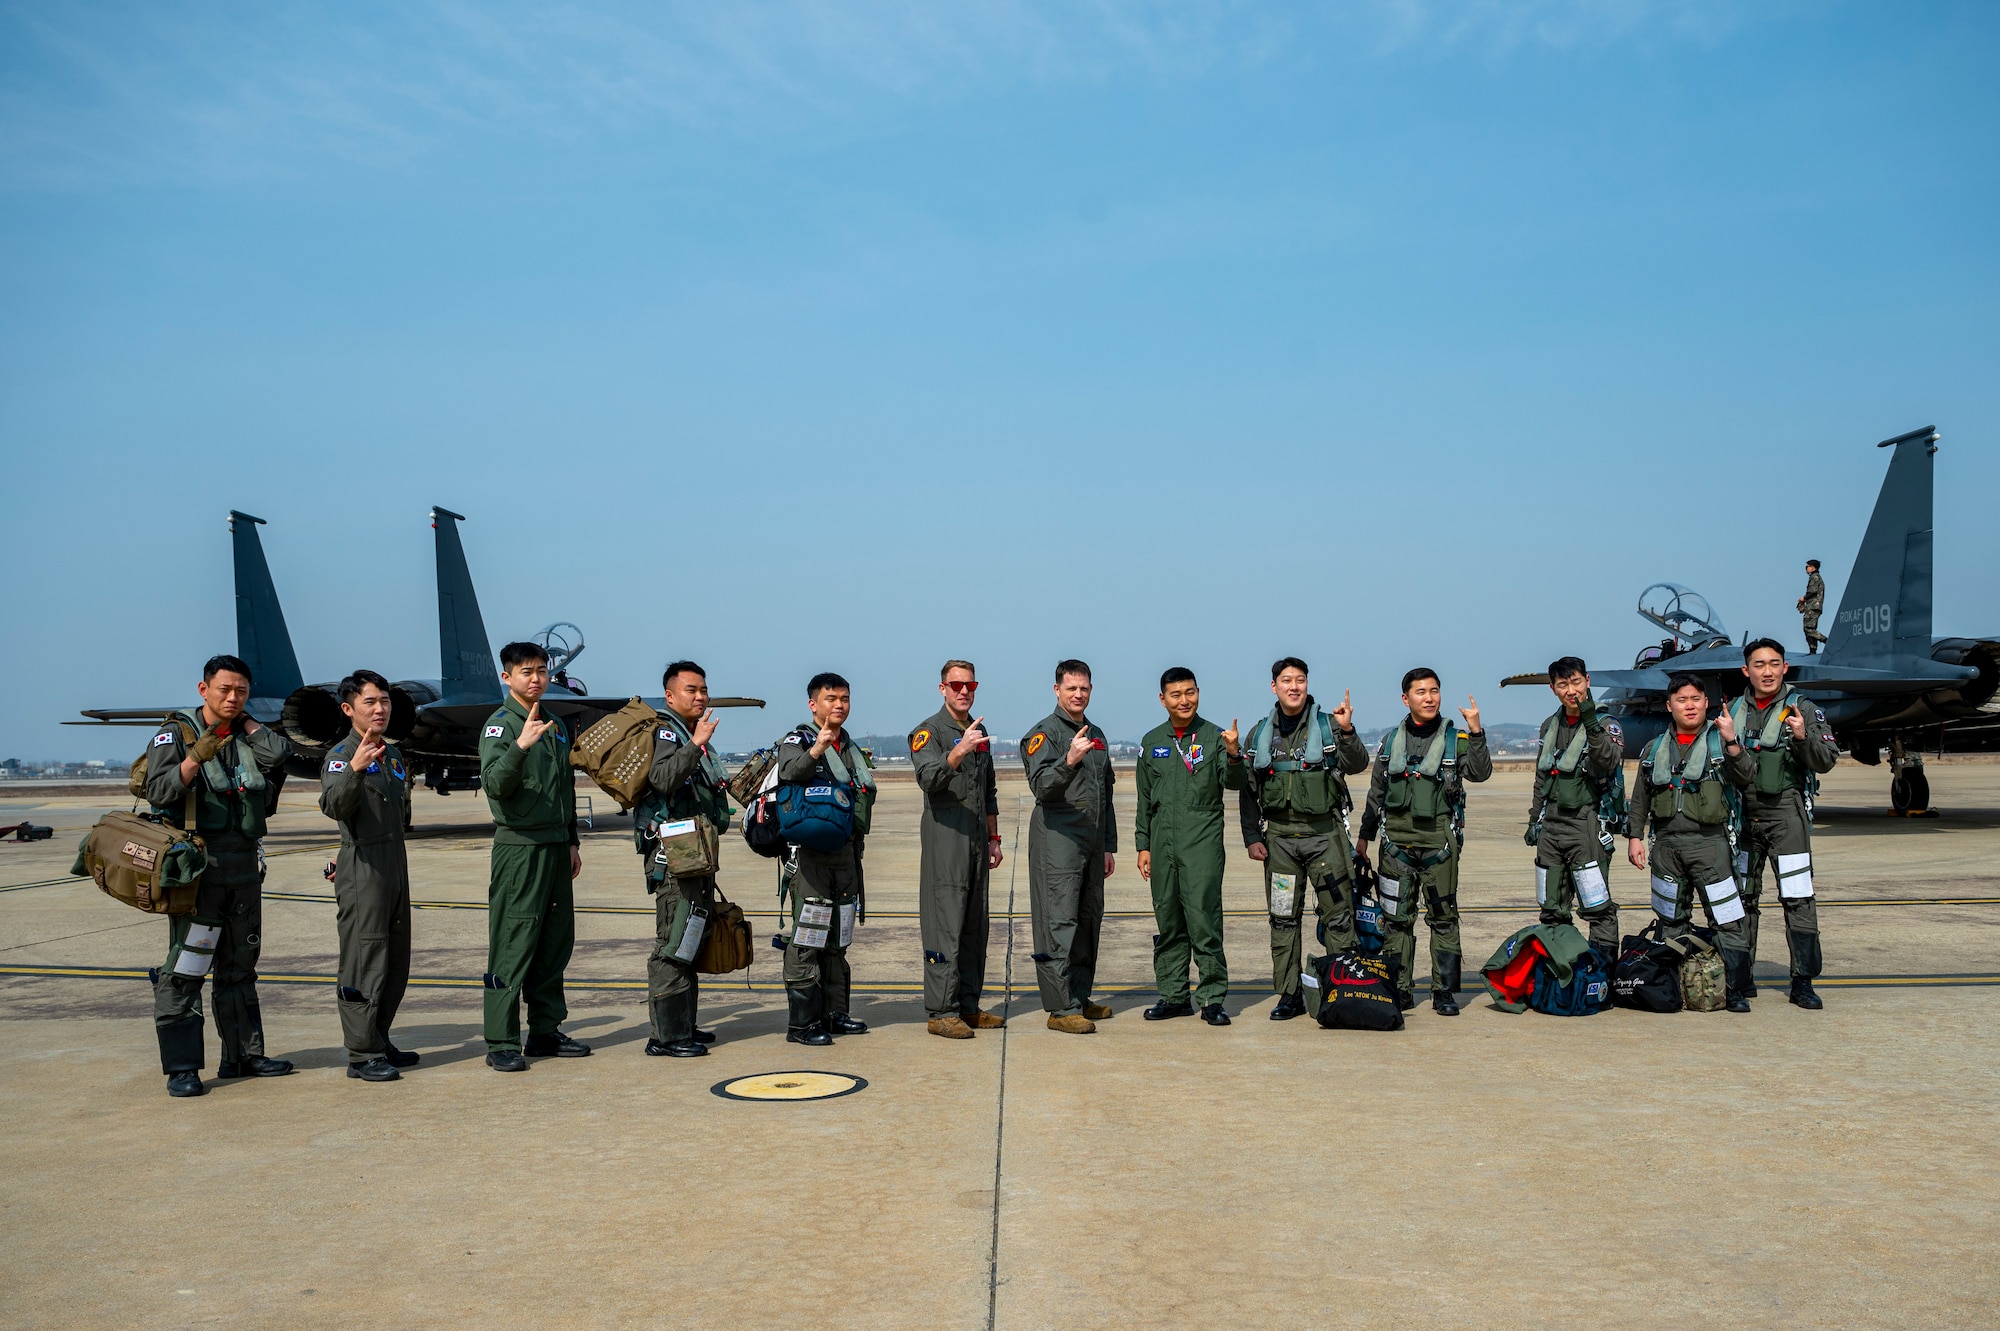 Service members from the U.S. Air Force and the Republic of Korea Air Force pose for a group photo during Buddy Squadron 24-2 at Osan Air Base, Republic of Korea, March 4, 2024. The Buddy Squadron Program allows for bilateral unification, giving more opportunity to train together and ensure lethality and readiness of pilots. The Buddy Squadron Program fosters objective-based training and improves interoperability between the U.S. and ROKAF fighter squadrons. (U.S. Air Force photo by Senior Airman Kaitlin Frazier)